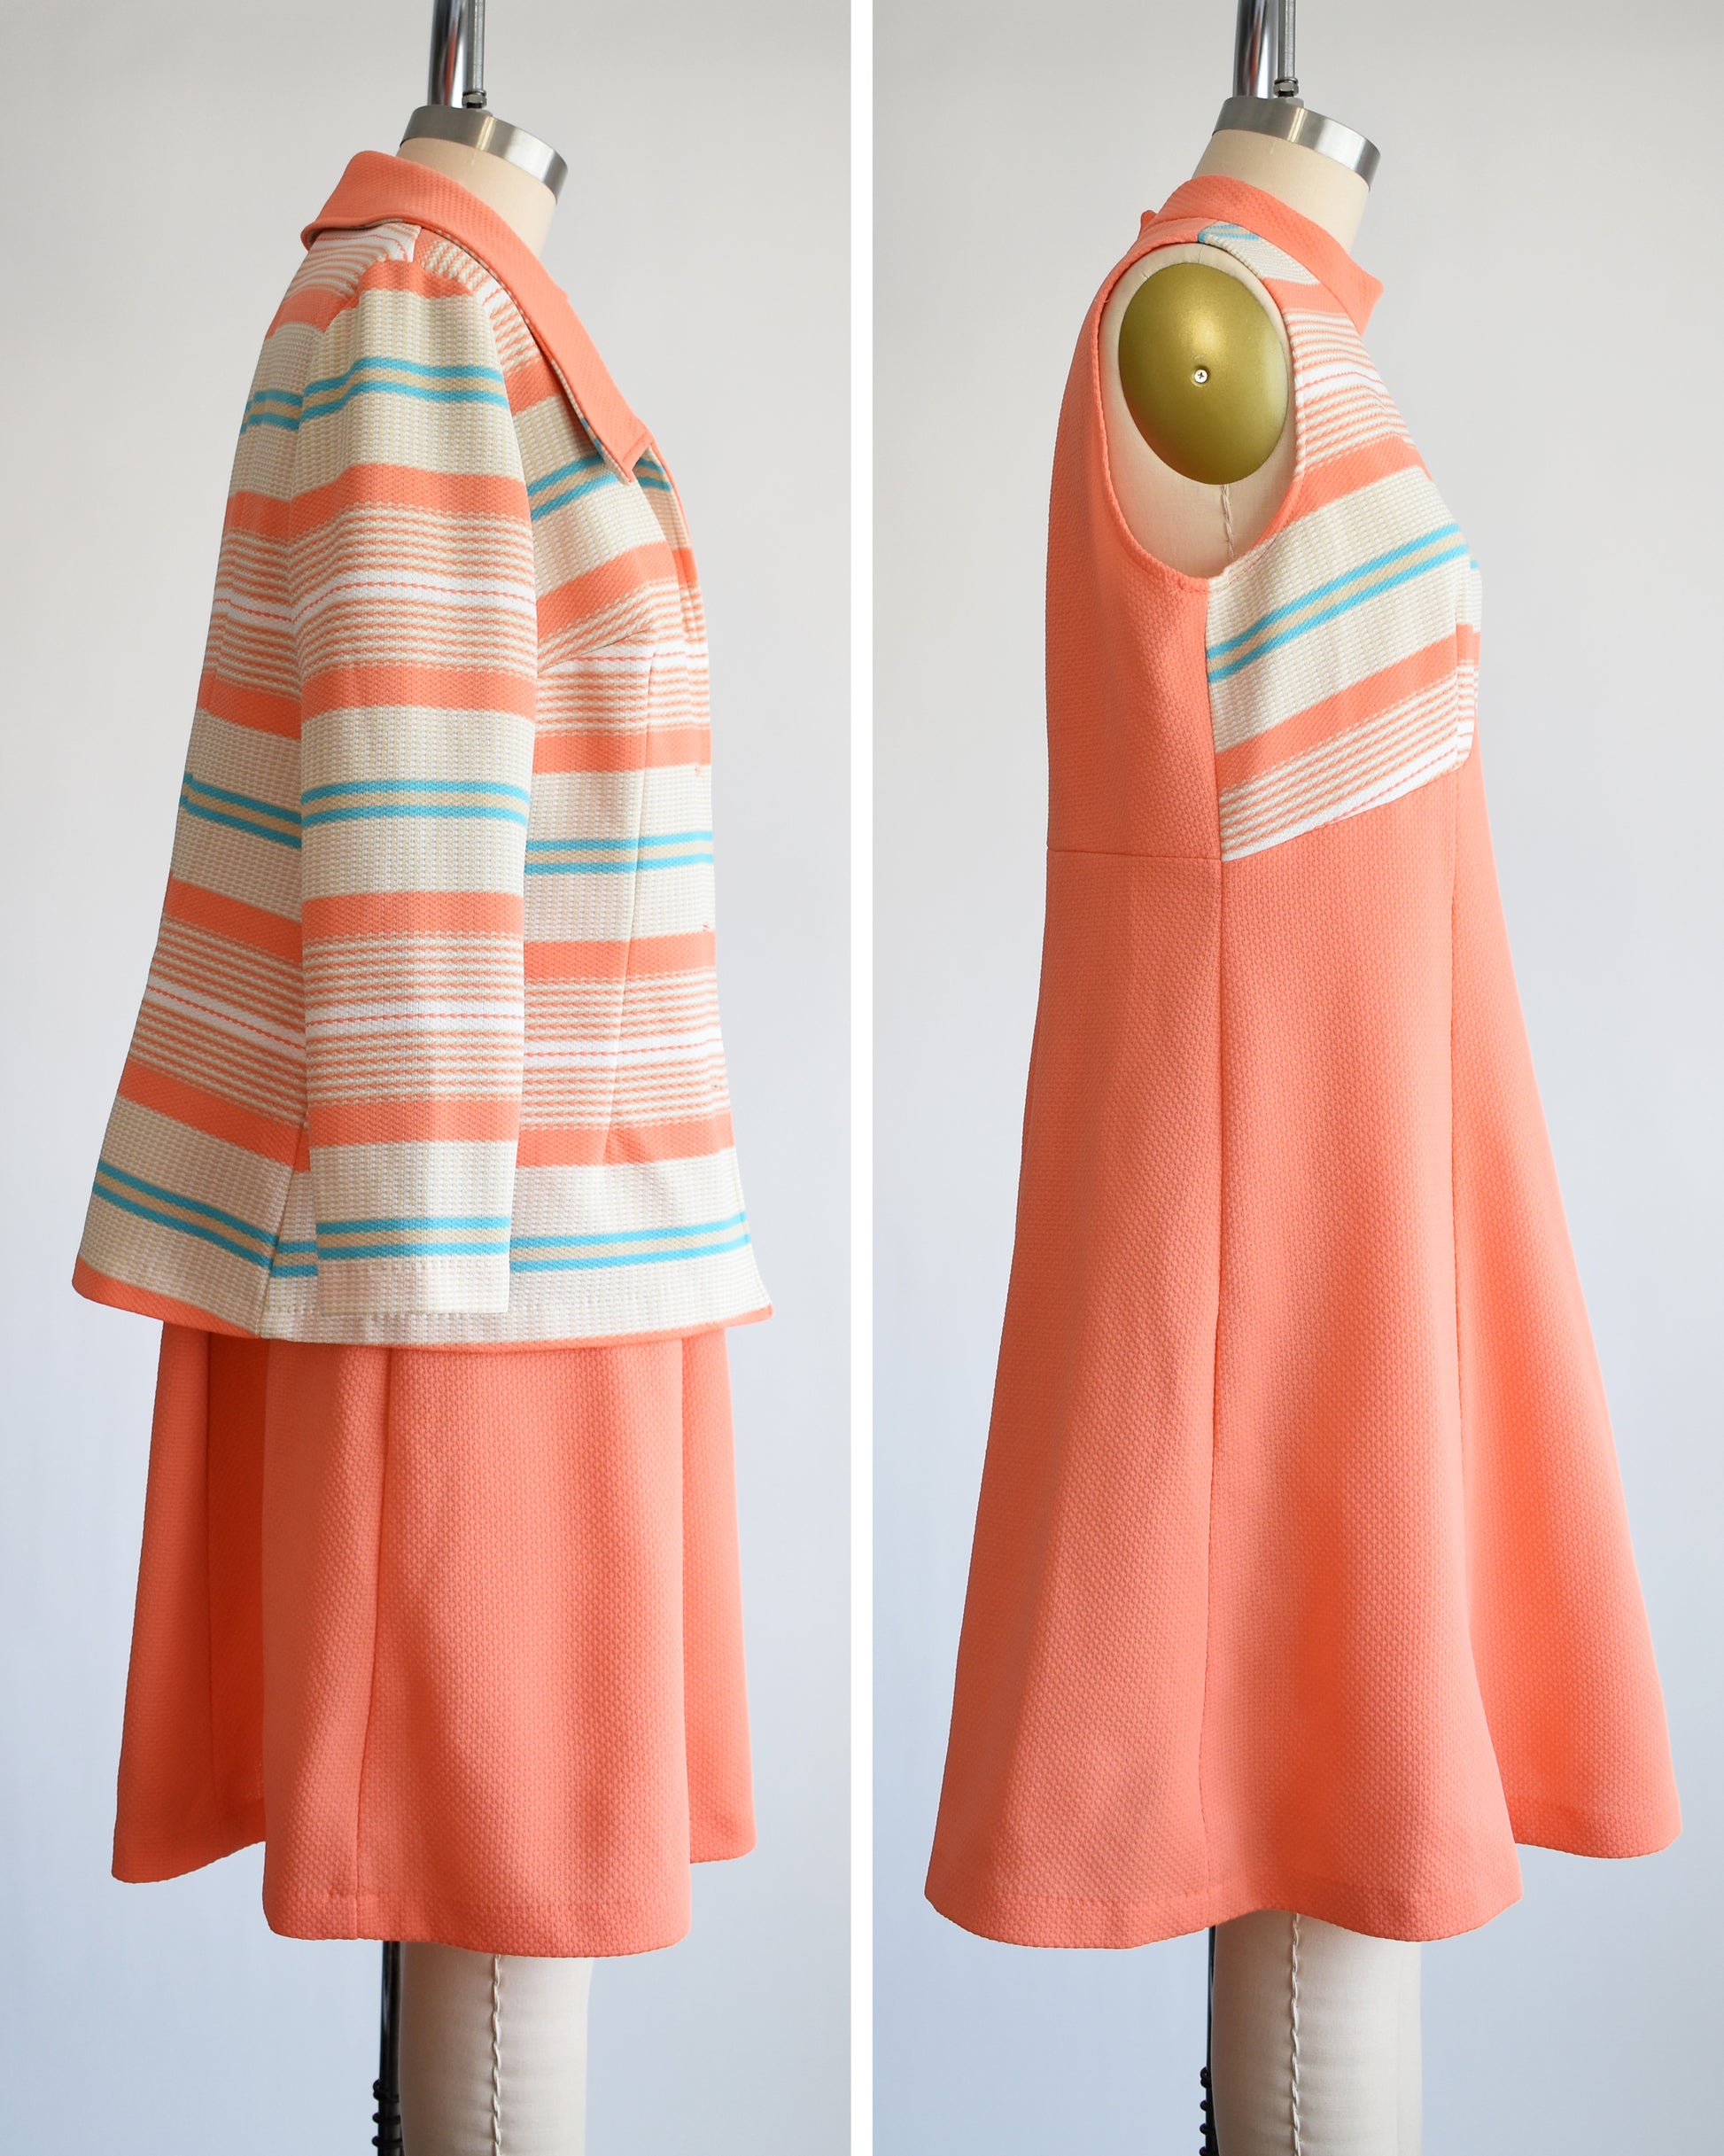 Side by side view of the side of a vintage 1970s peach and blue mod dress set. The left shows the set with the jacket and the right photo shows only the dress